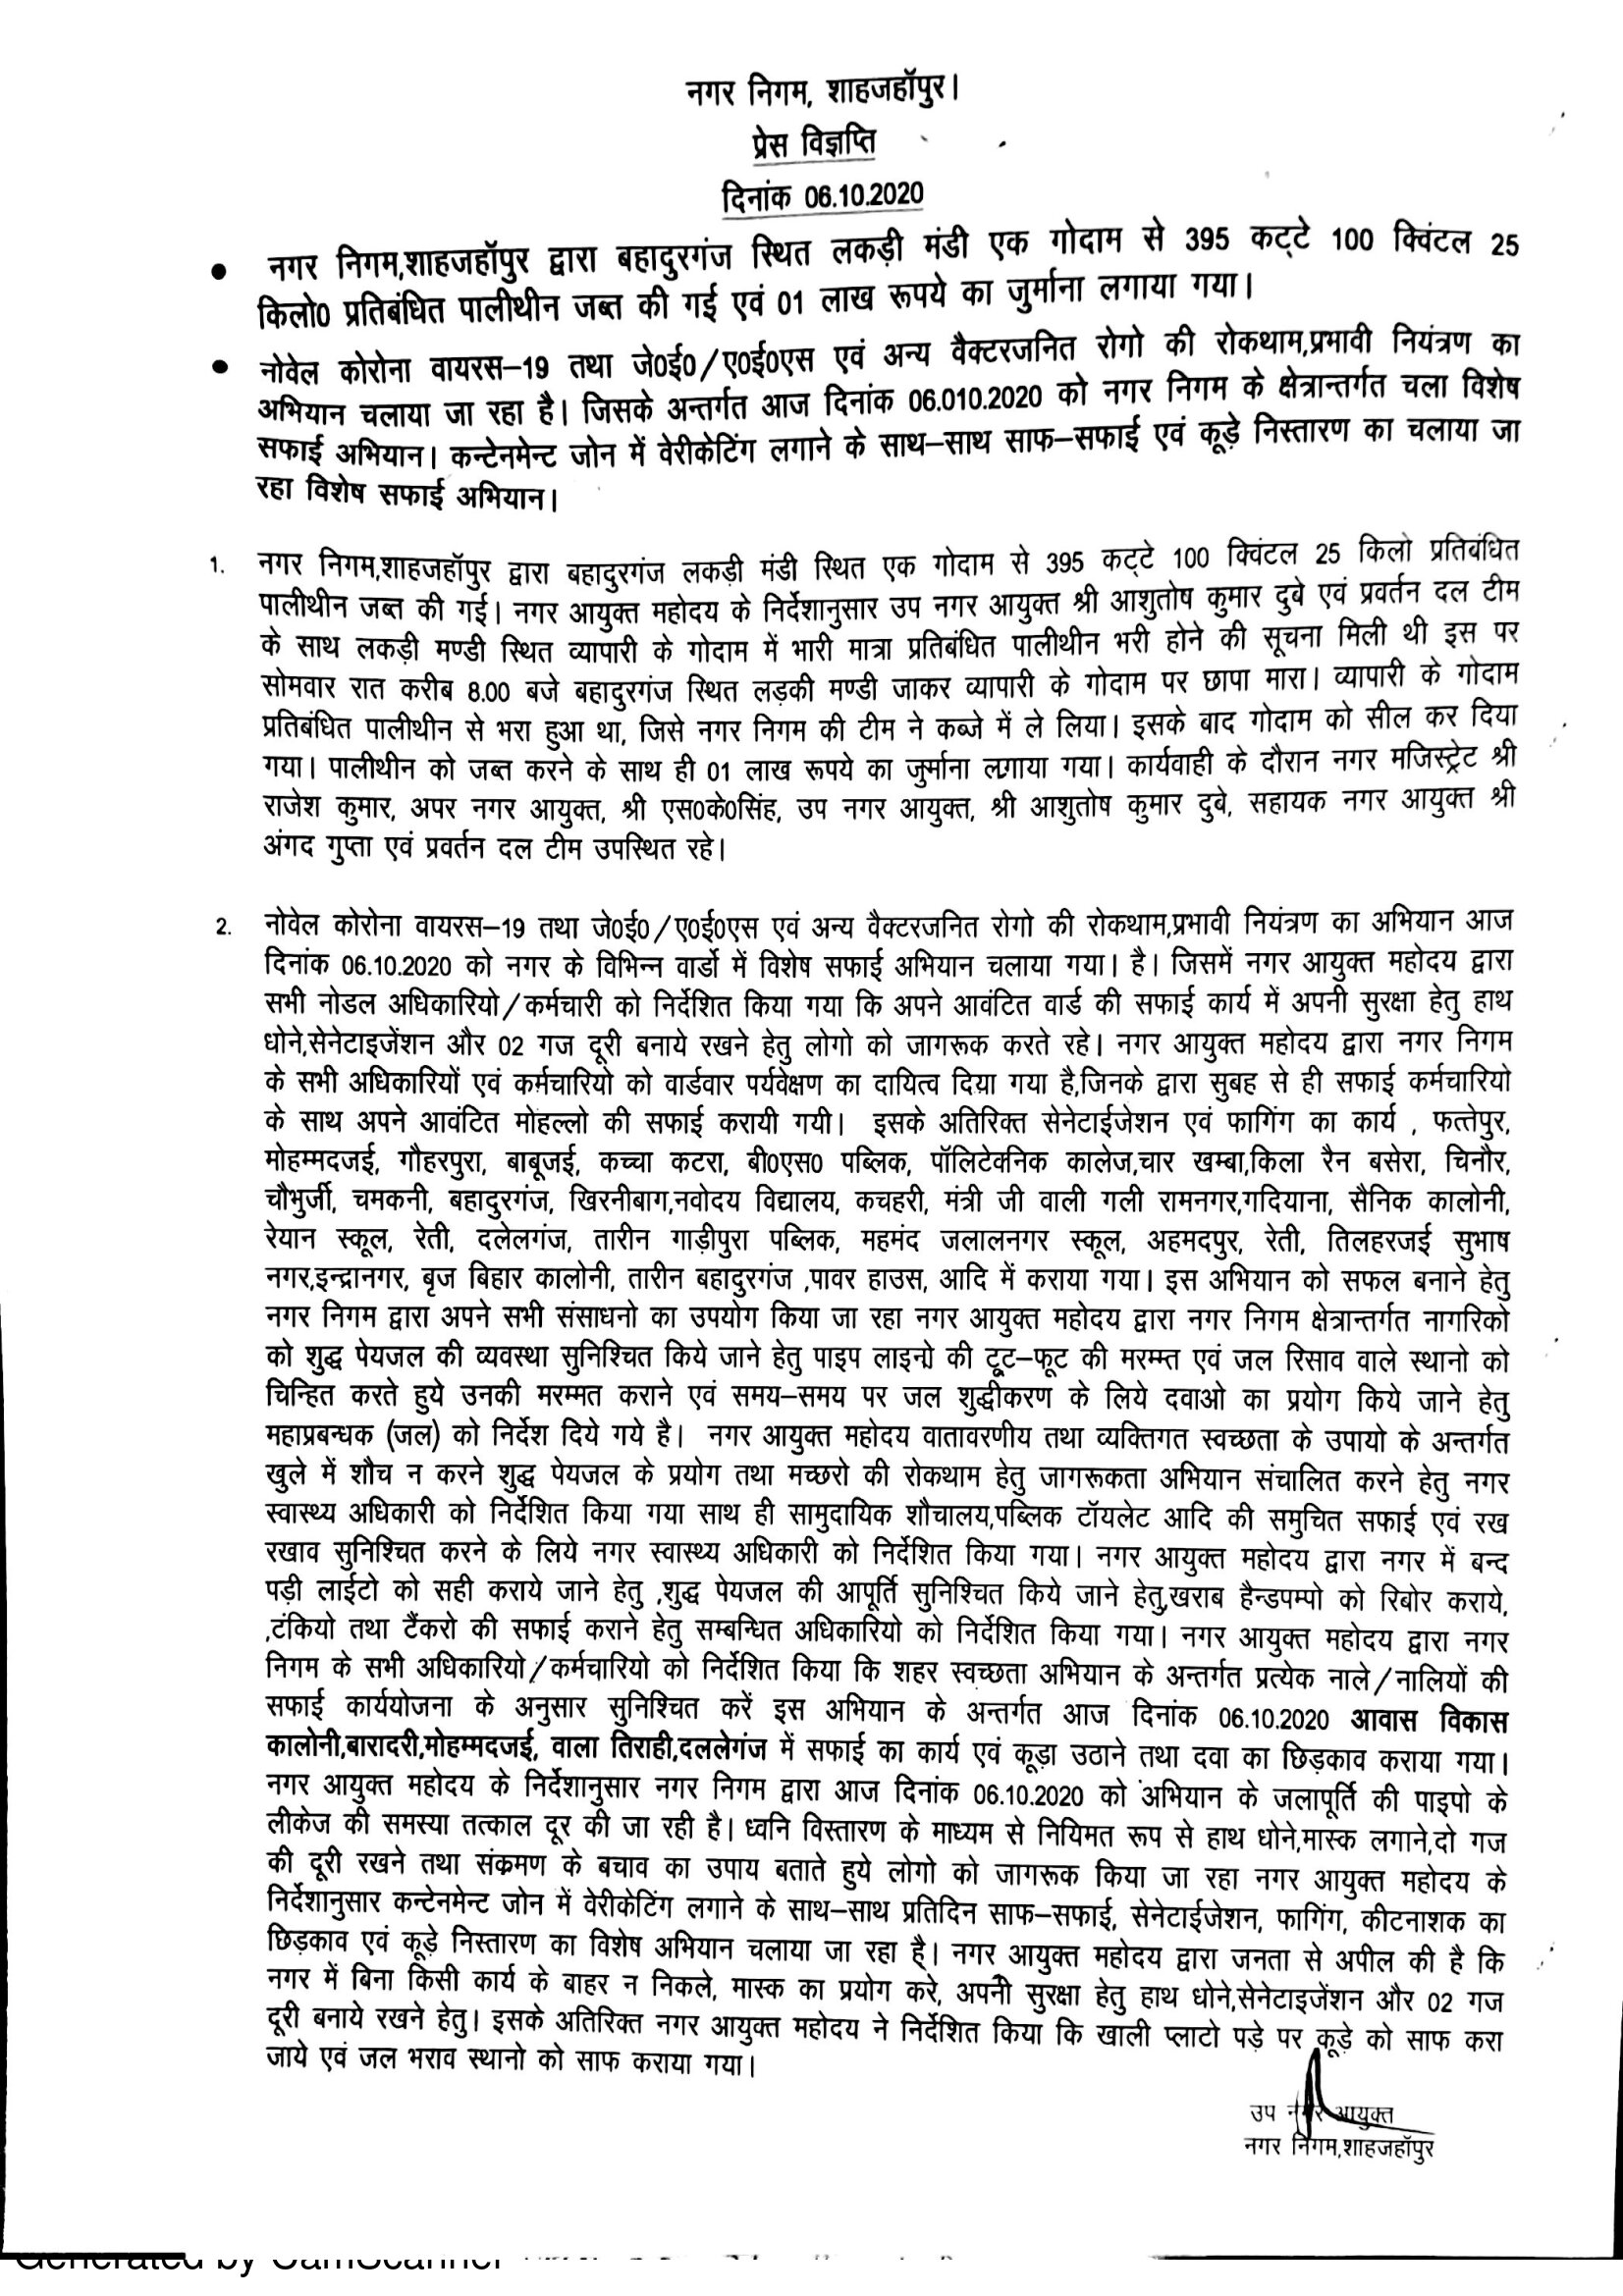 Regarding special cleanliness campaign run on 06/10/2020 in the area of responsibility of Municipal Corporation Shahjahanpur